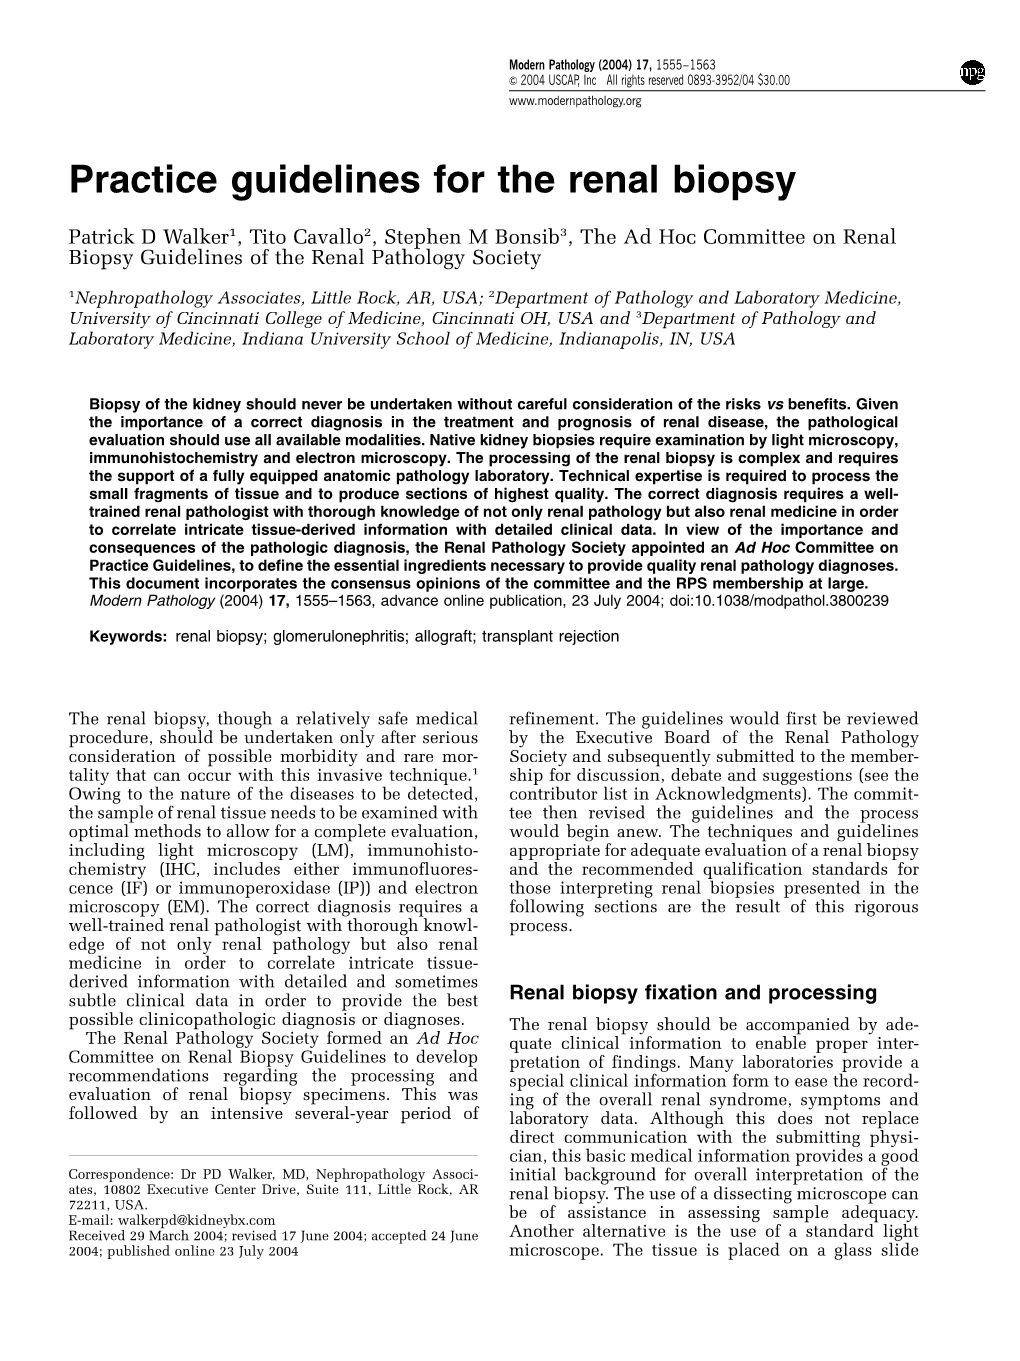 Practice Guidelines for the Renal Biopsy